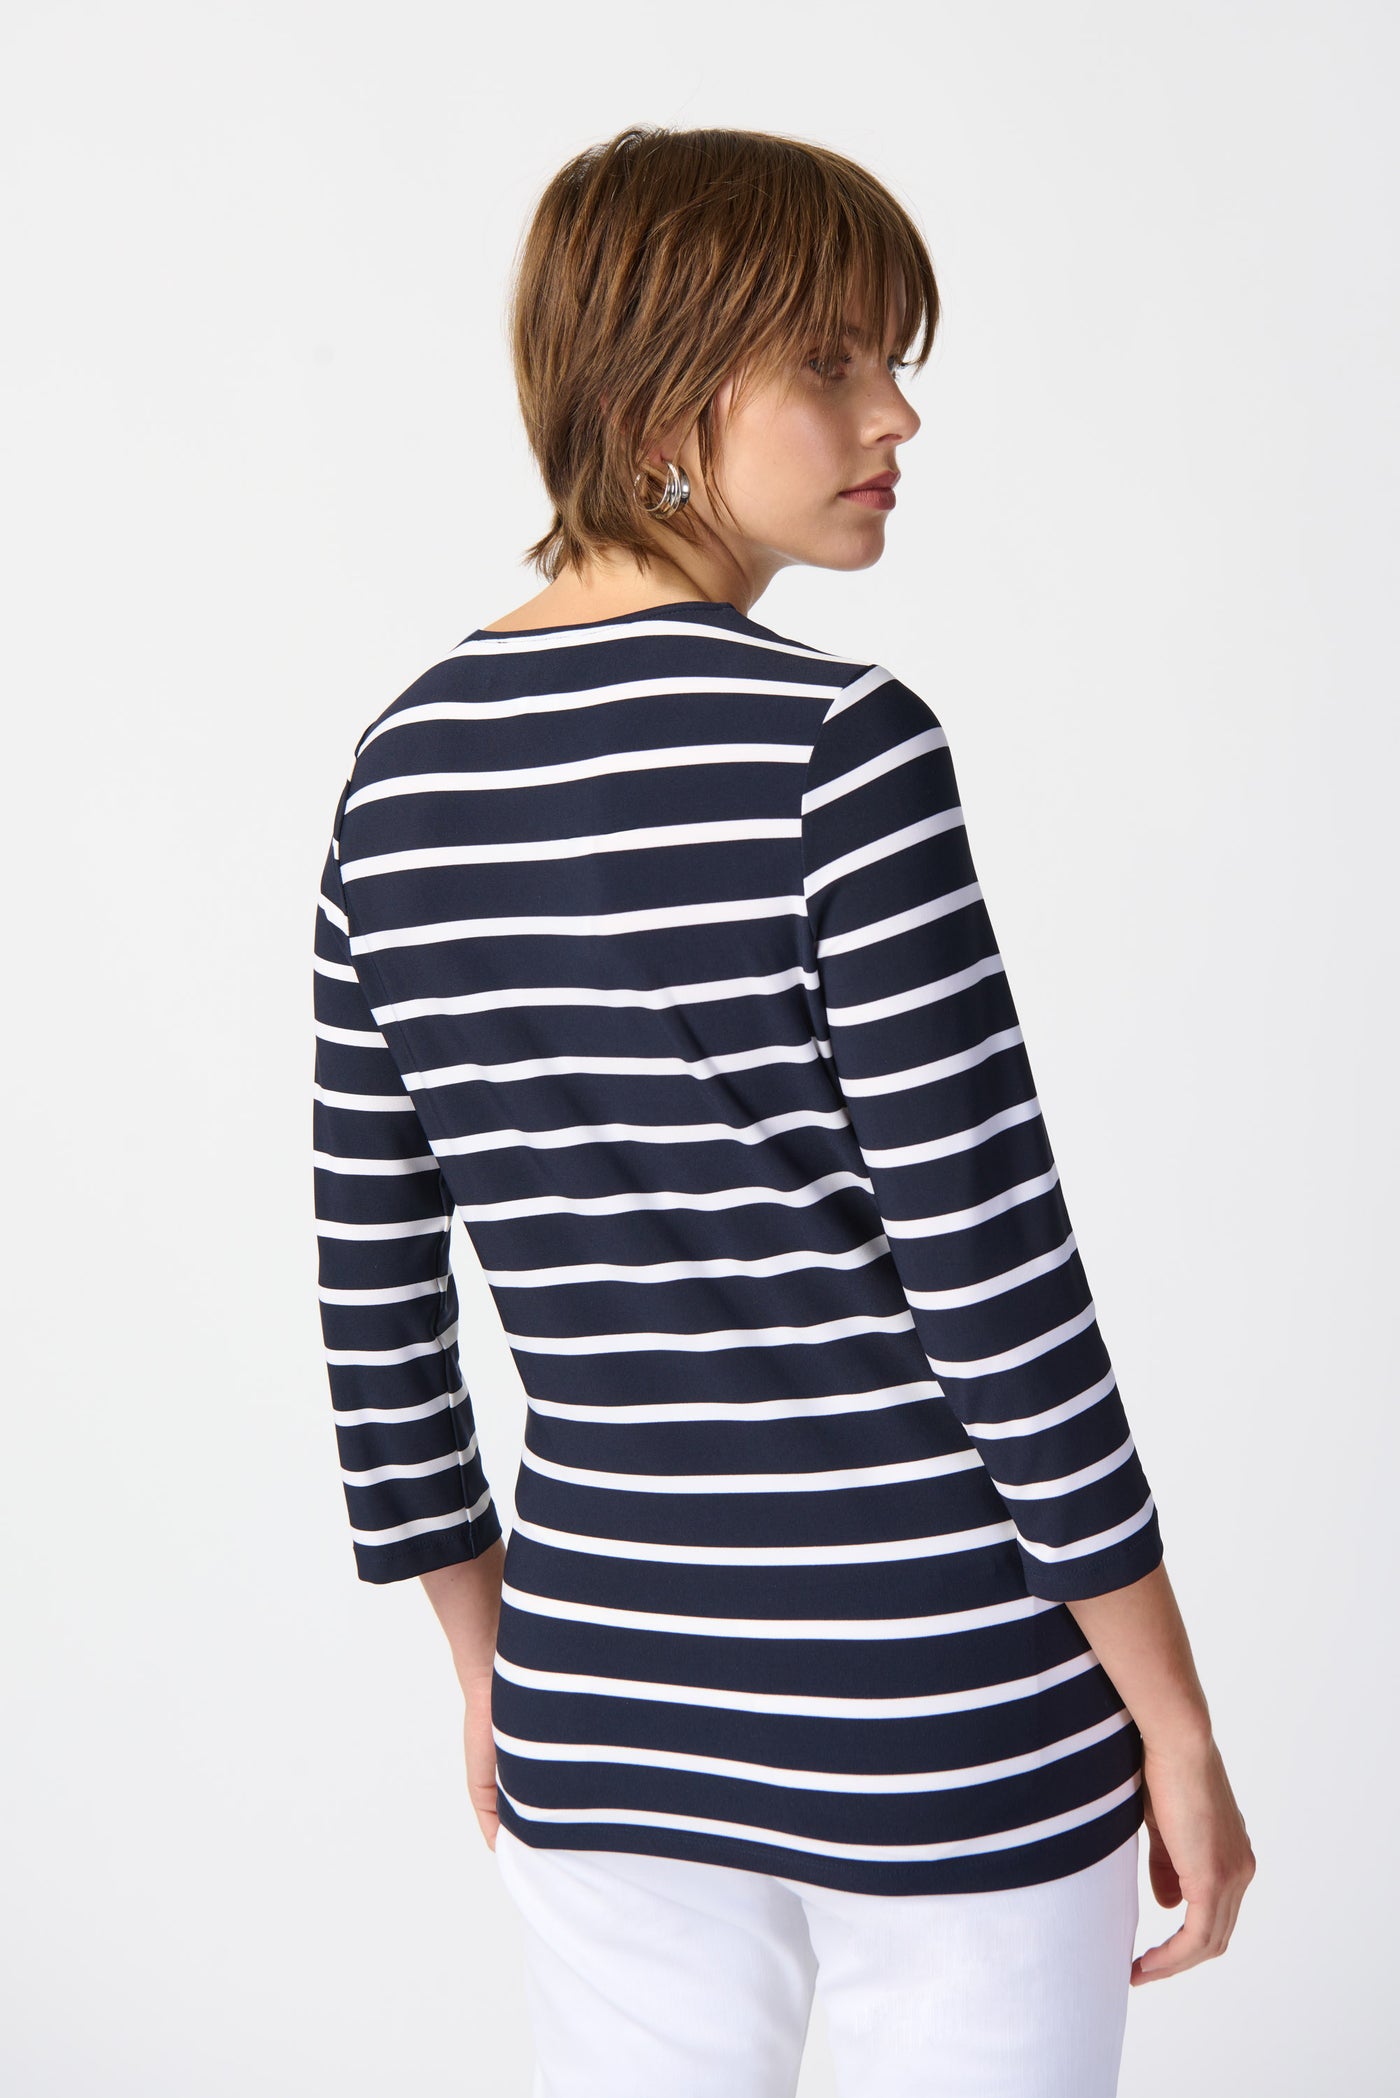 Joseph Ribkoff Striped Silky Knit Fitted Top 